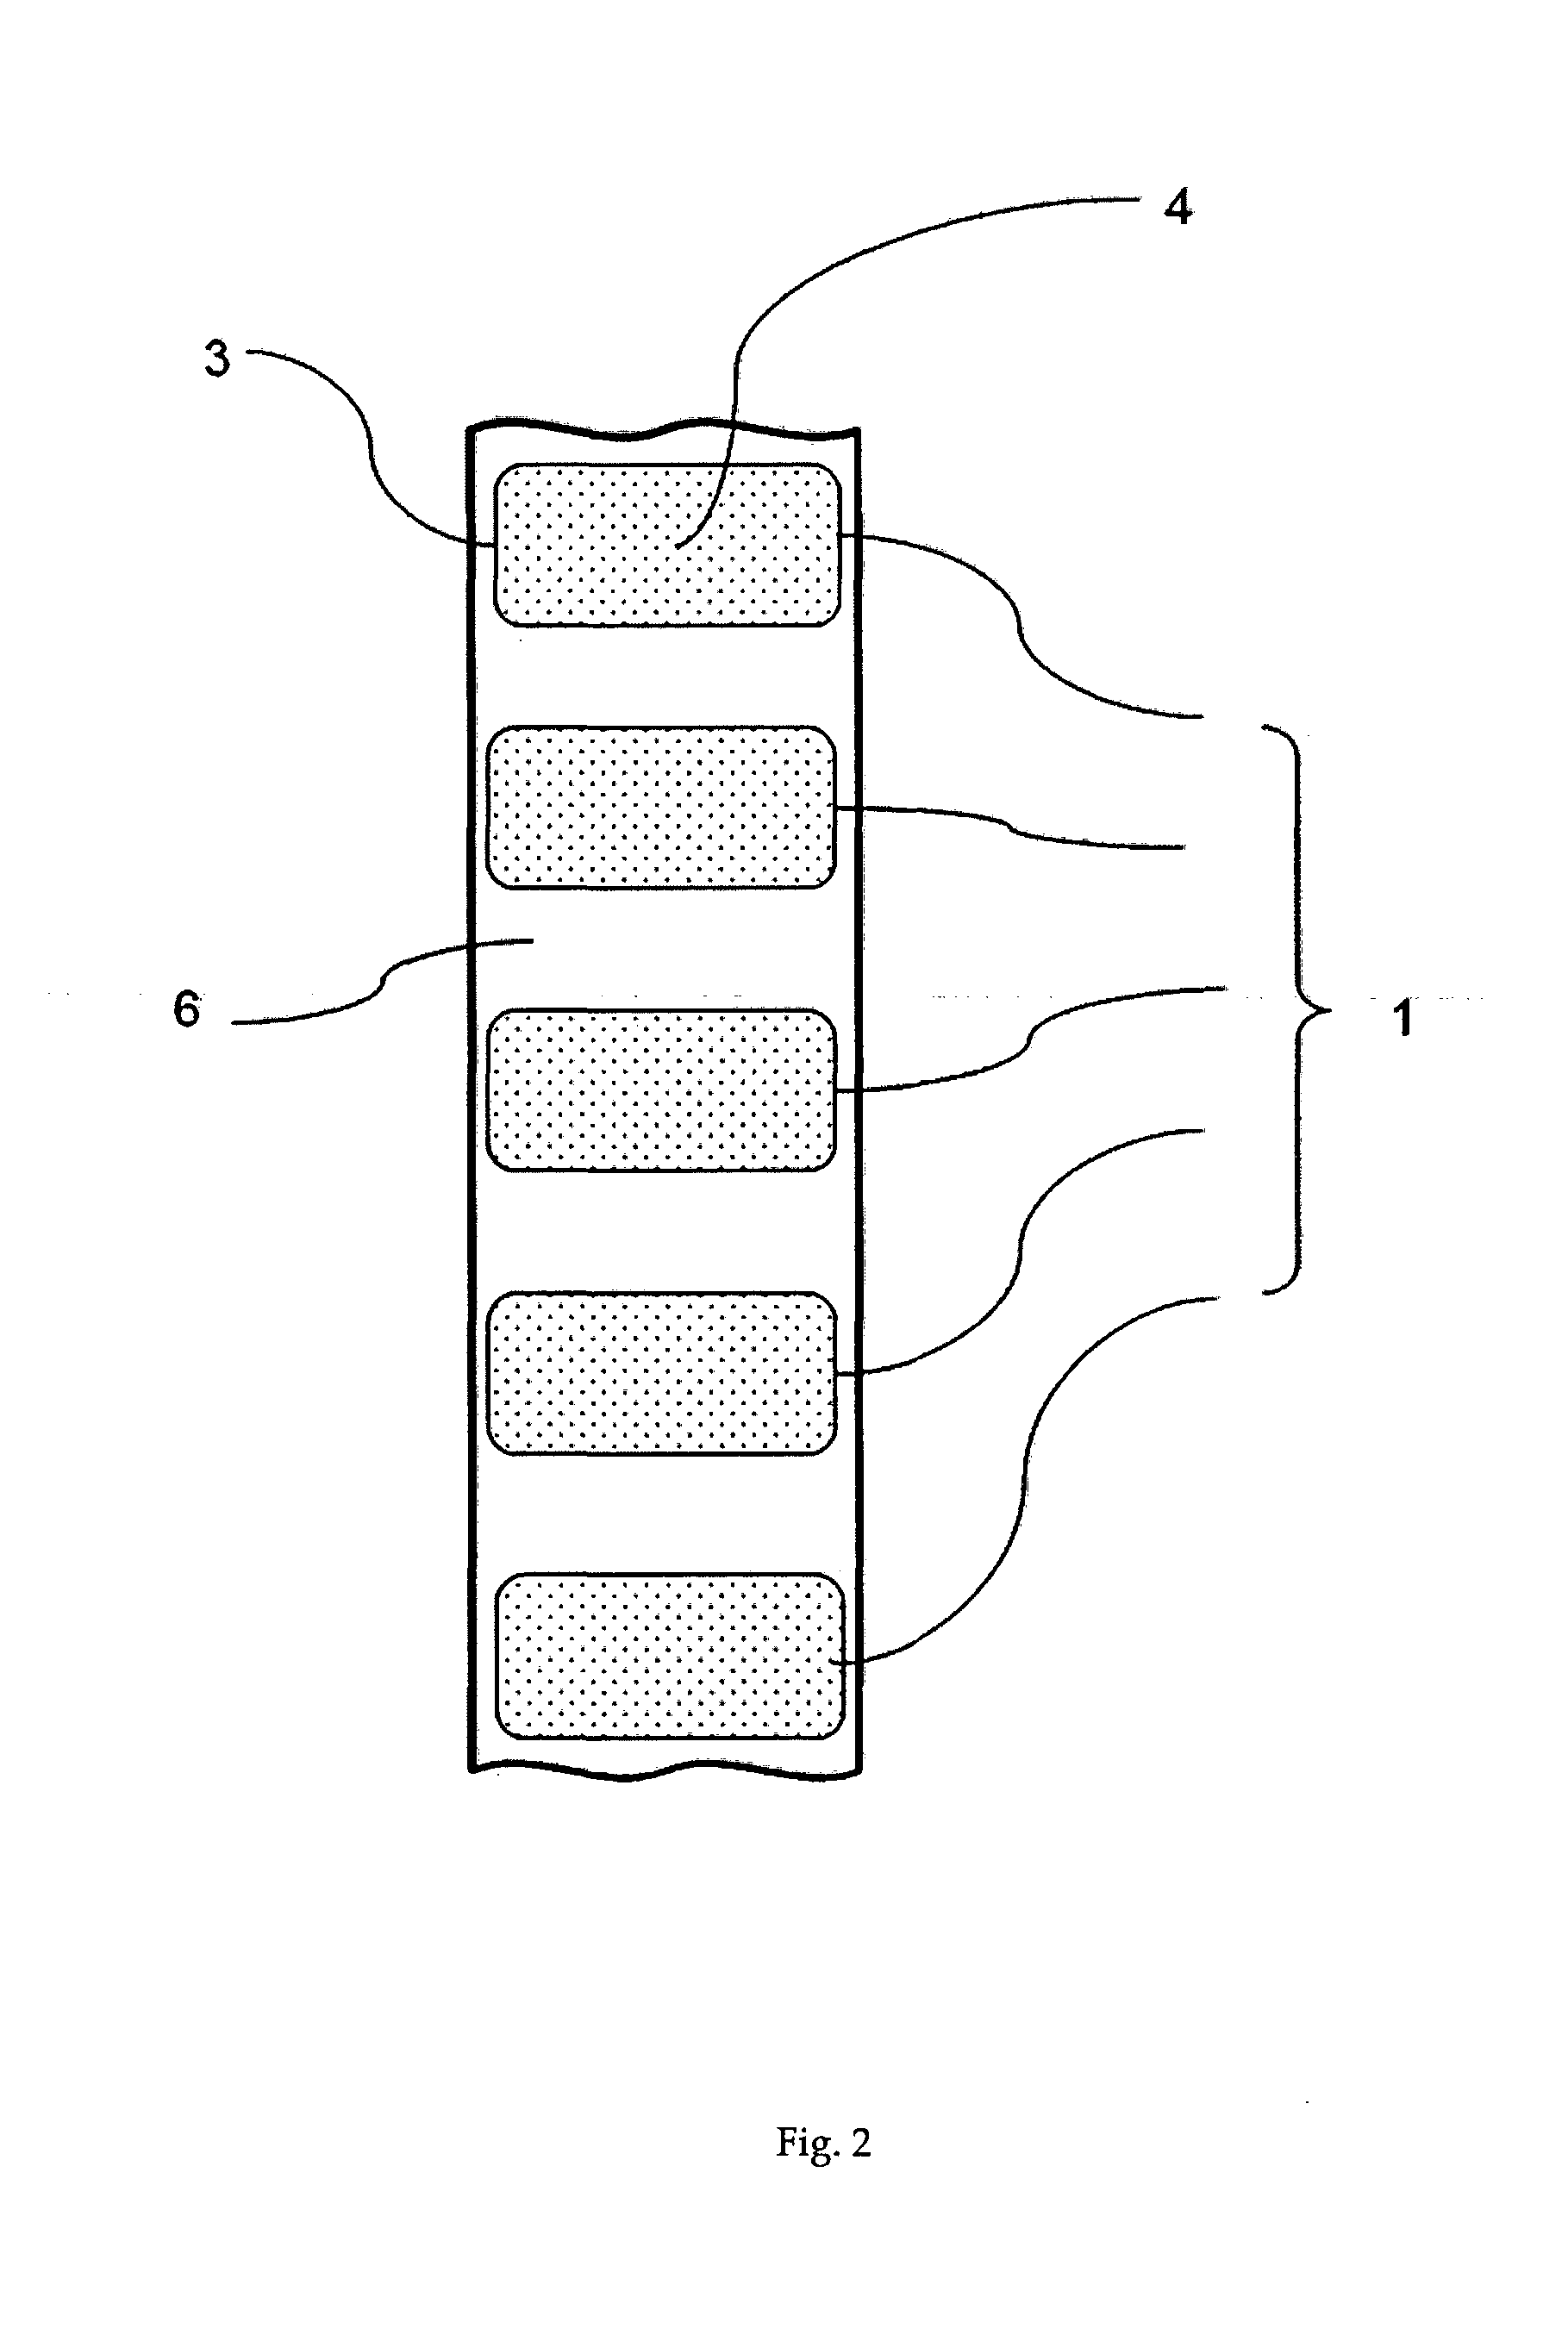 Electrode sensor kit, electrode assembly, and topical preparation for establishing electrical contact with skin, use thereof, and method of electro-impedance tomography (EIT) imaging using these